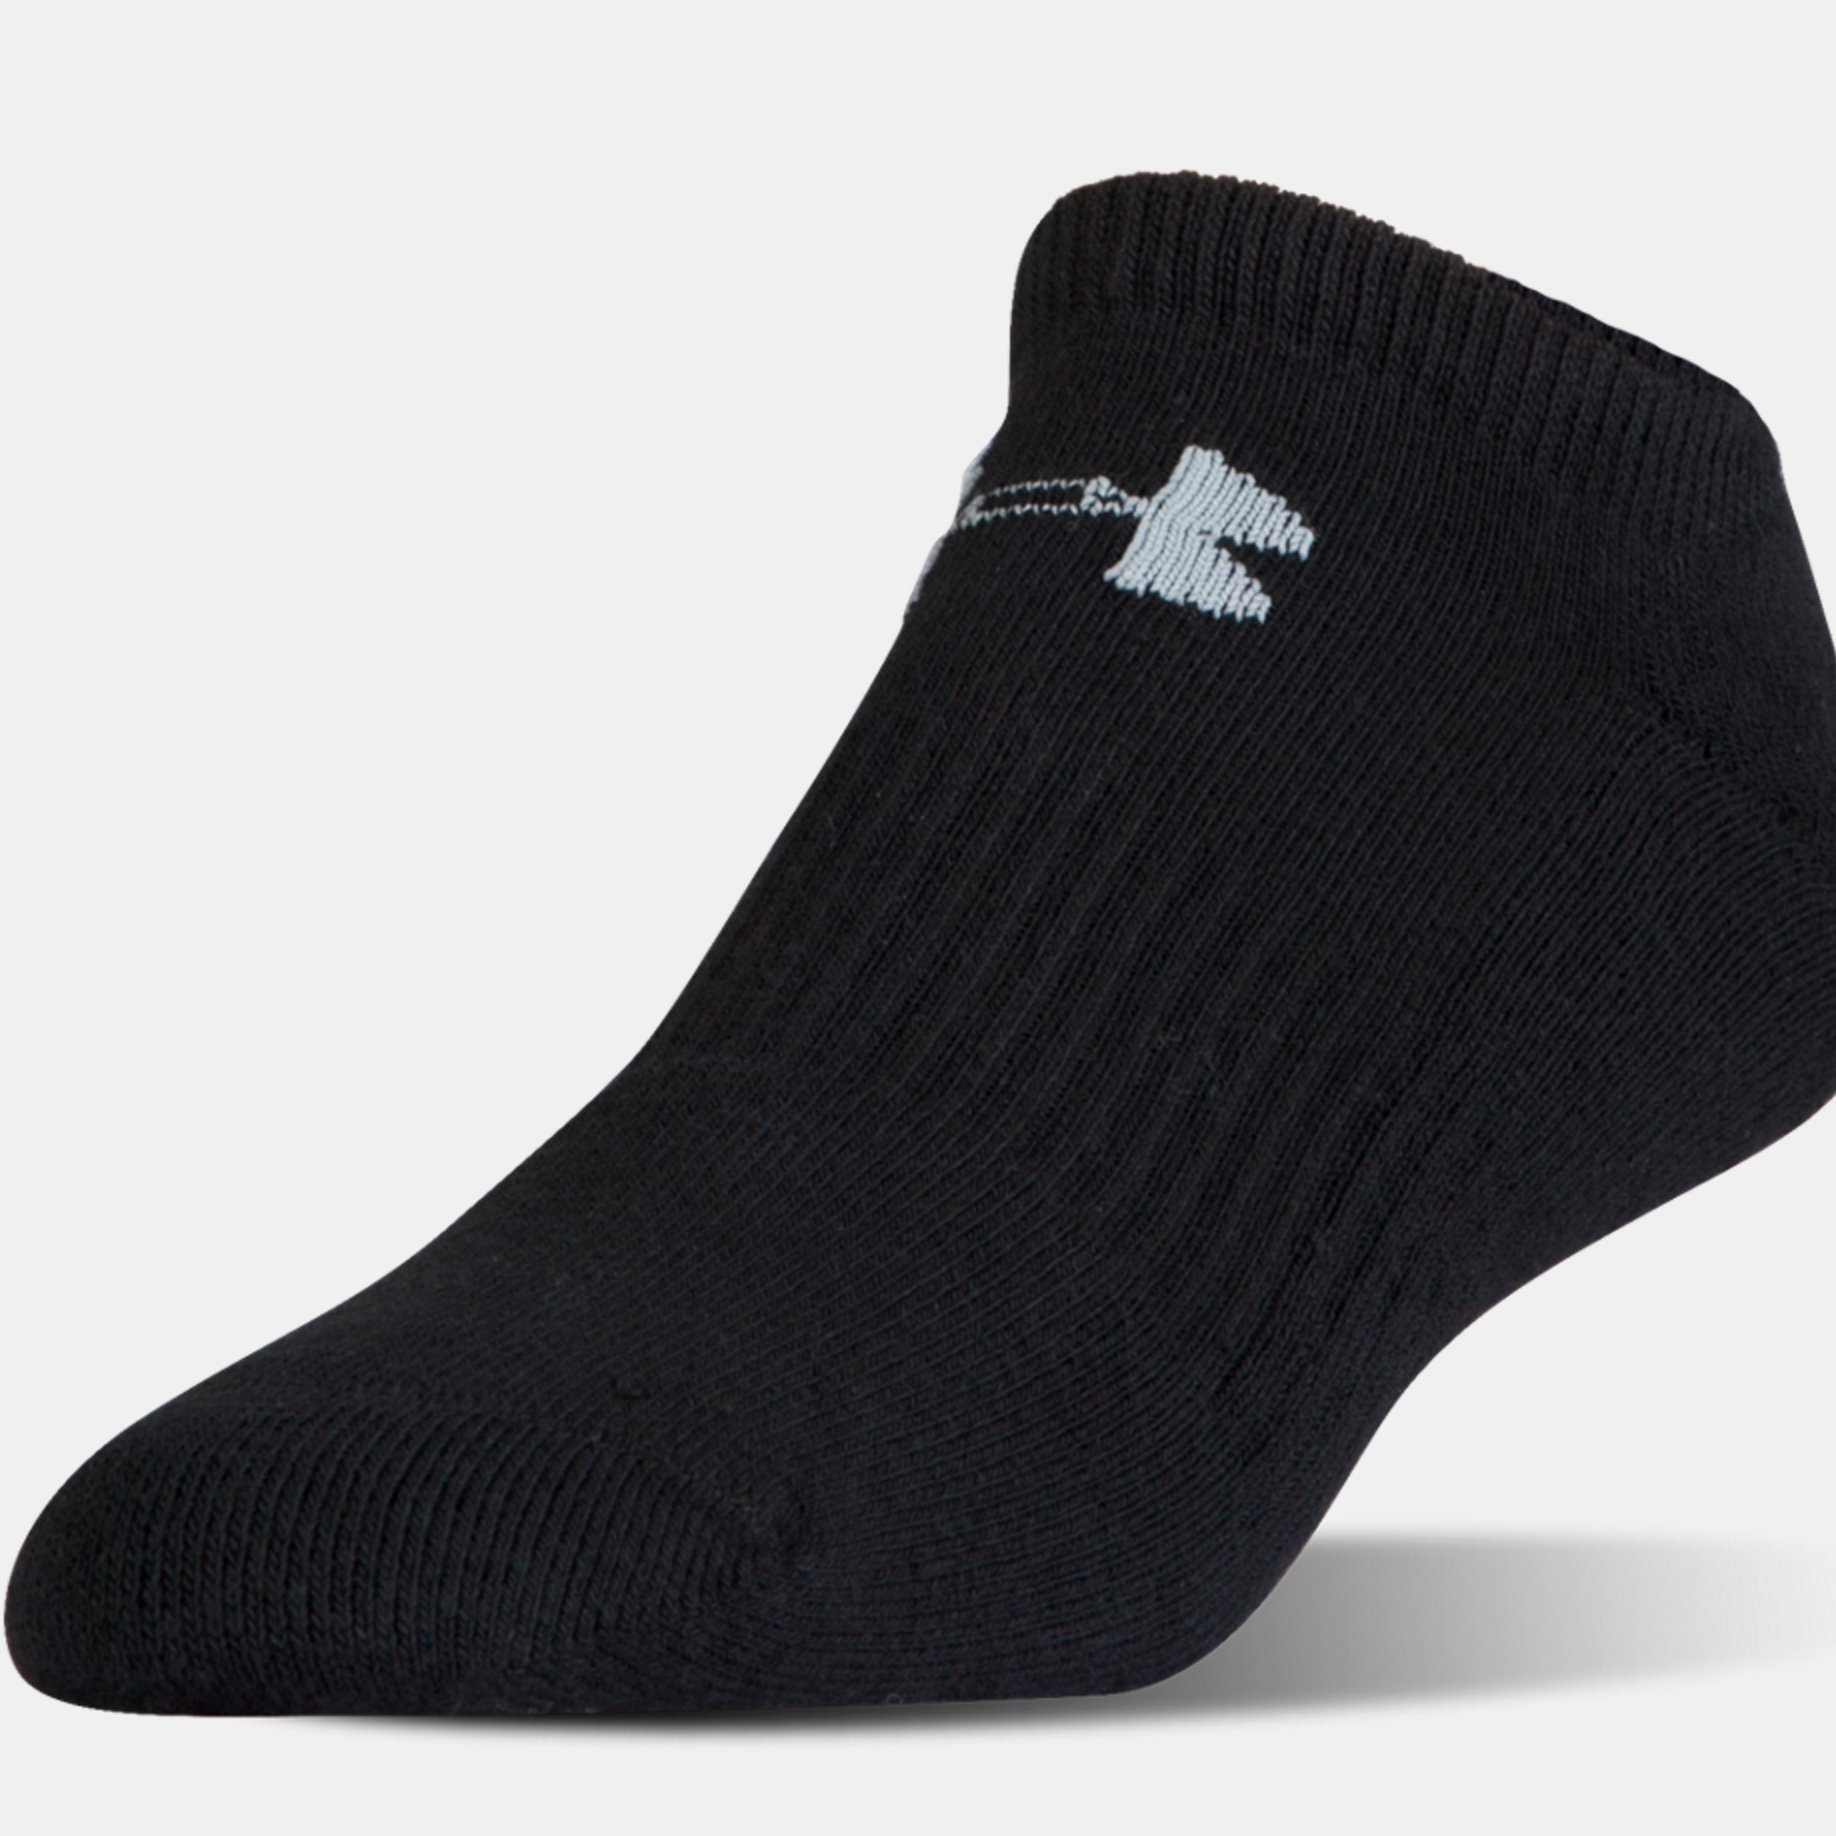  -  under armour 2.0 No Show 6-Pack Socks